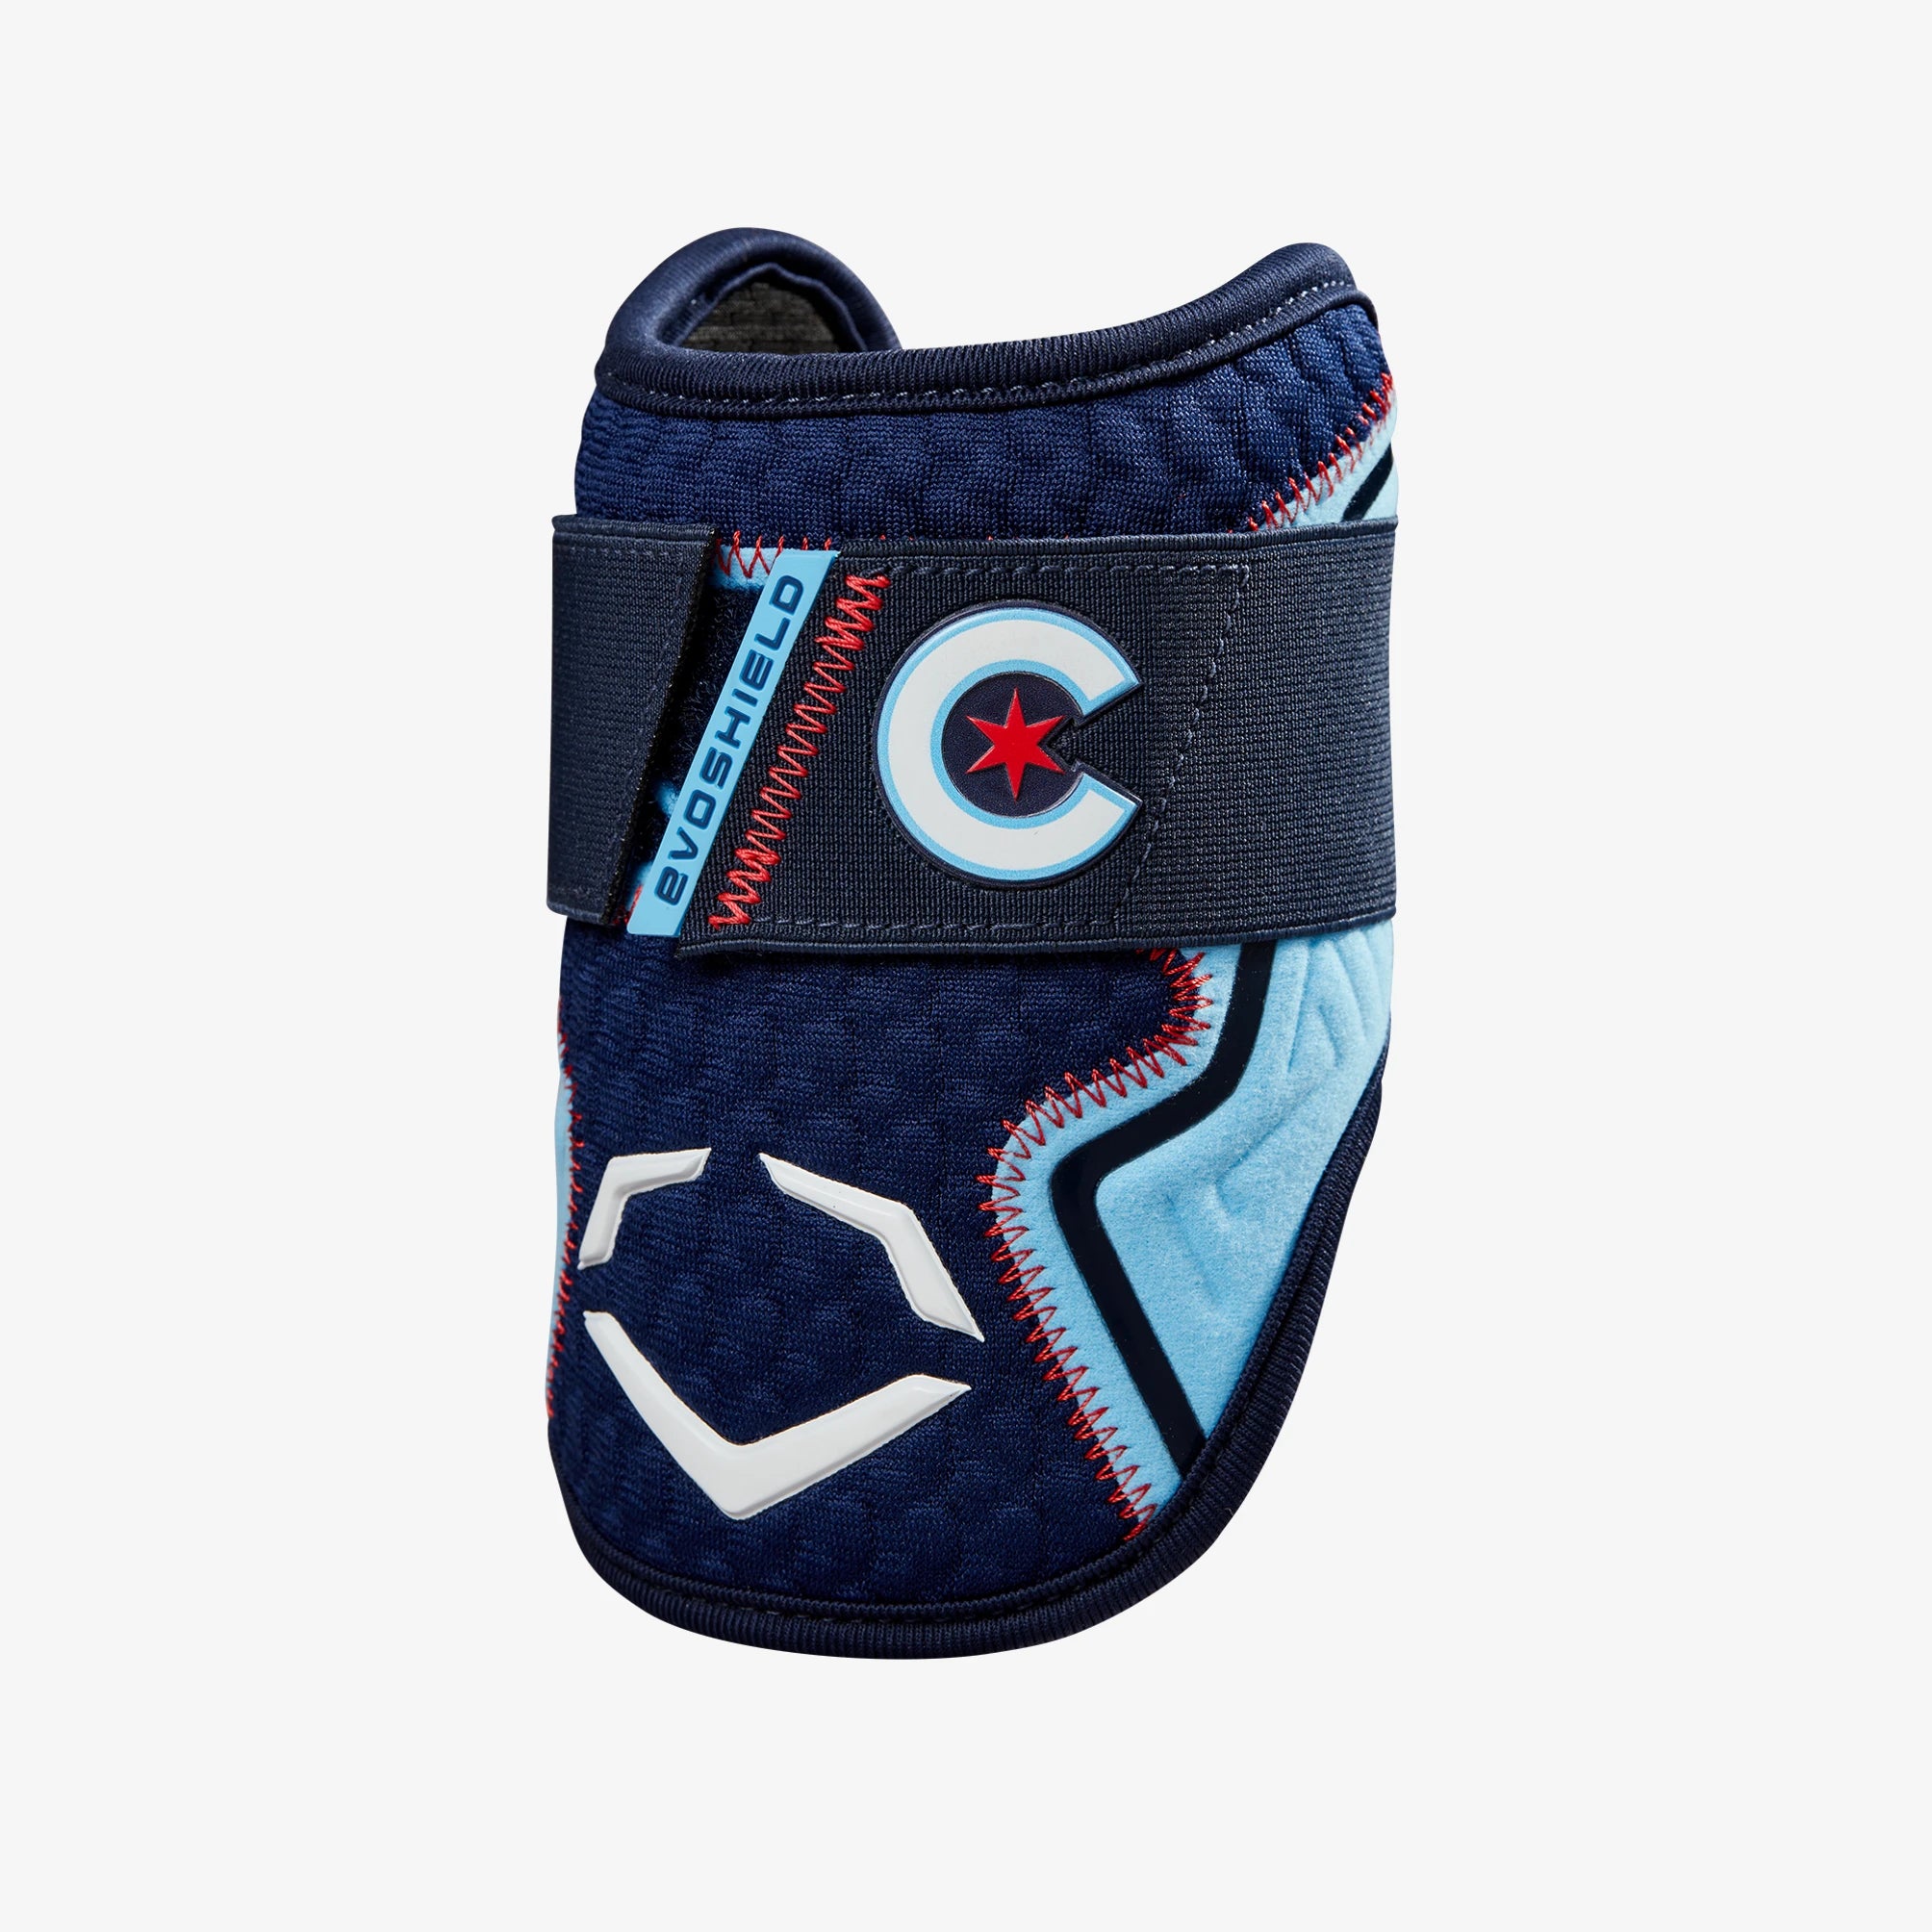 EvoShield PRO-SRZ 2.0 ON FIELD COLLECTION BATTER'S ELBOW GUARD: CUBS